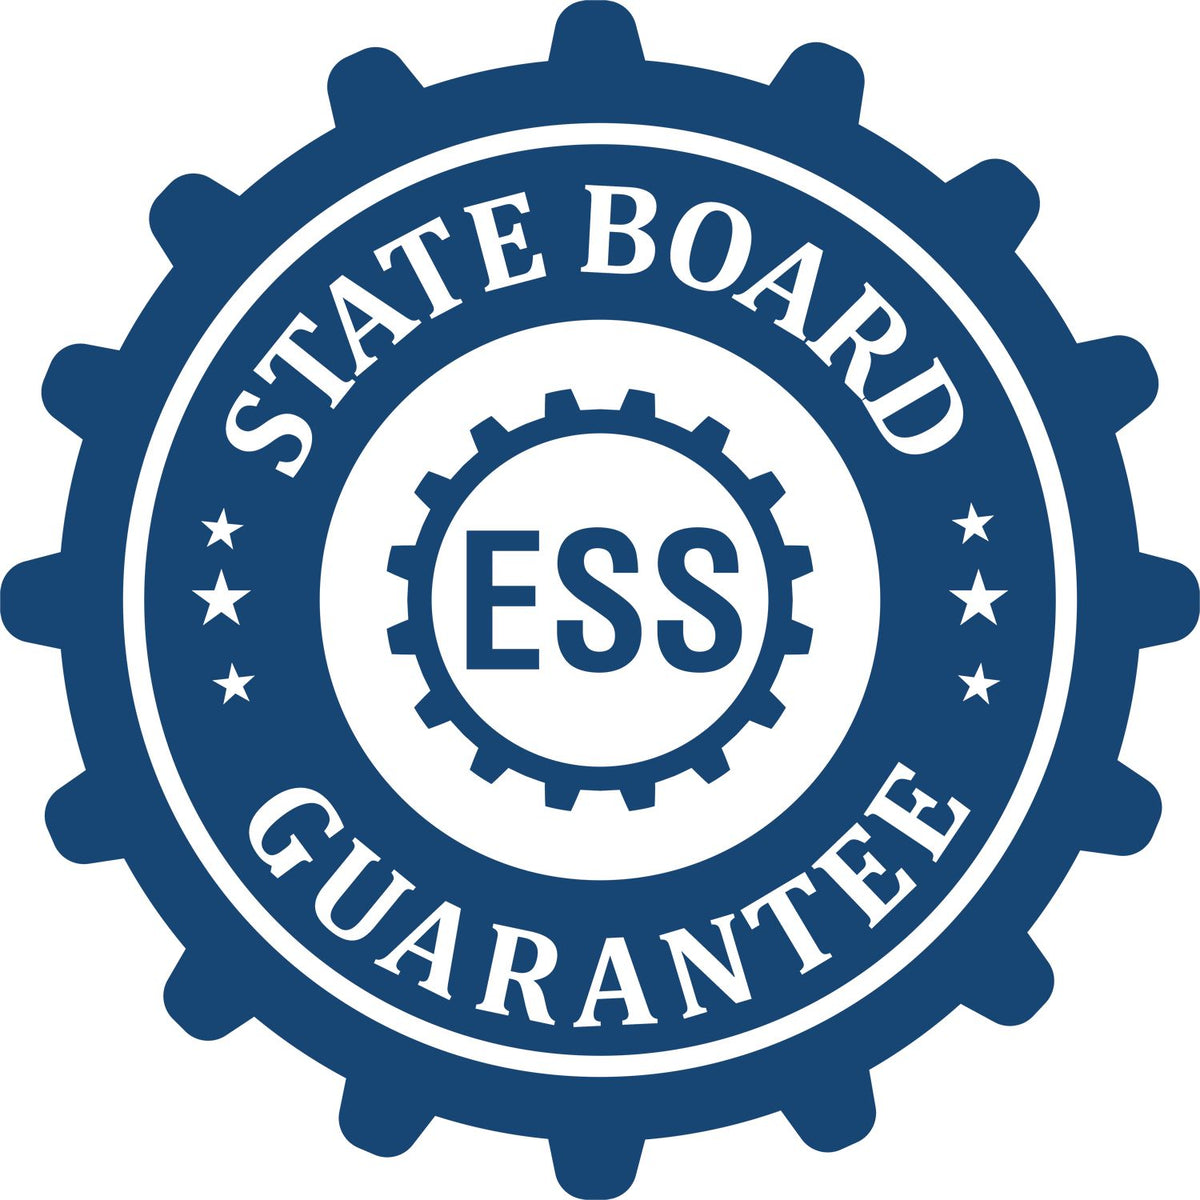 An emblem in a gear shape illustrating a state board guarantee for the Handheld Kentucky Land Surveyor Seal product.